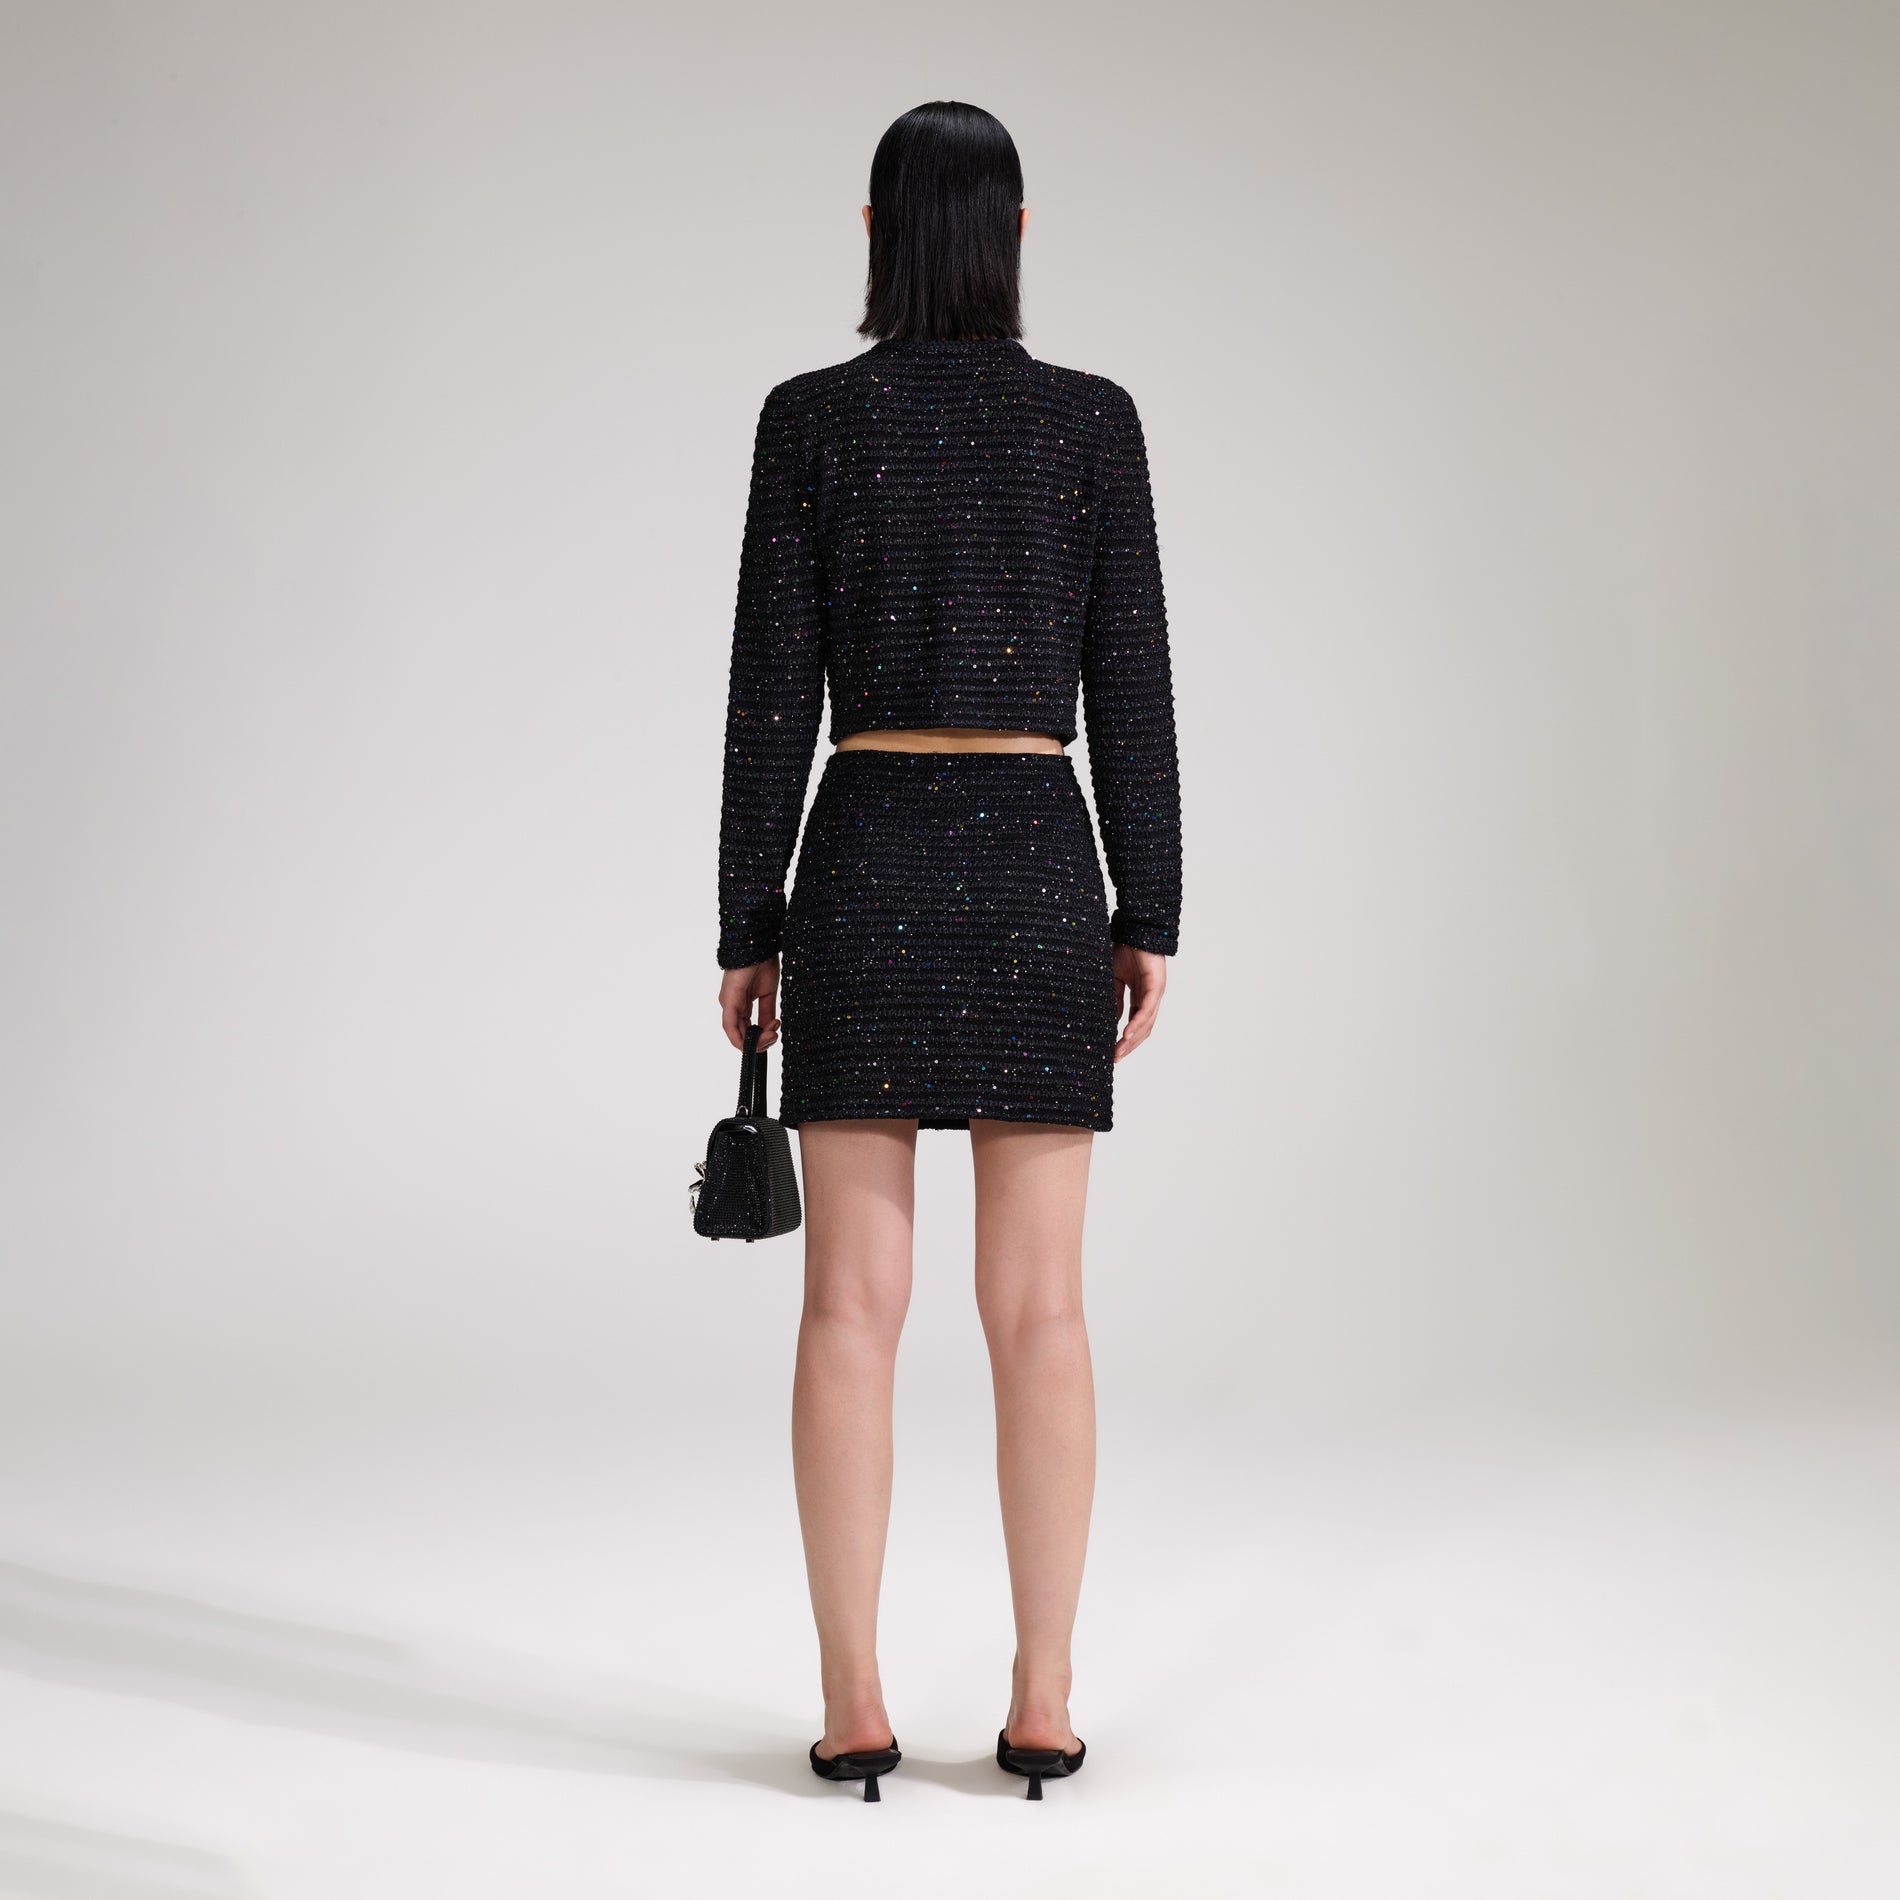 A woman wearing the Black Sequin Knit Skirt